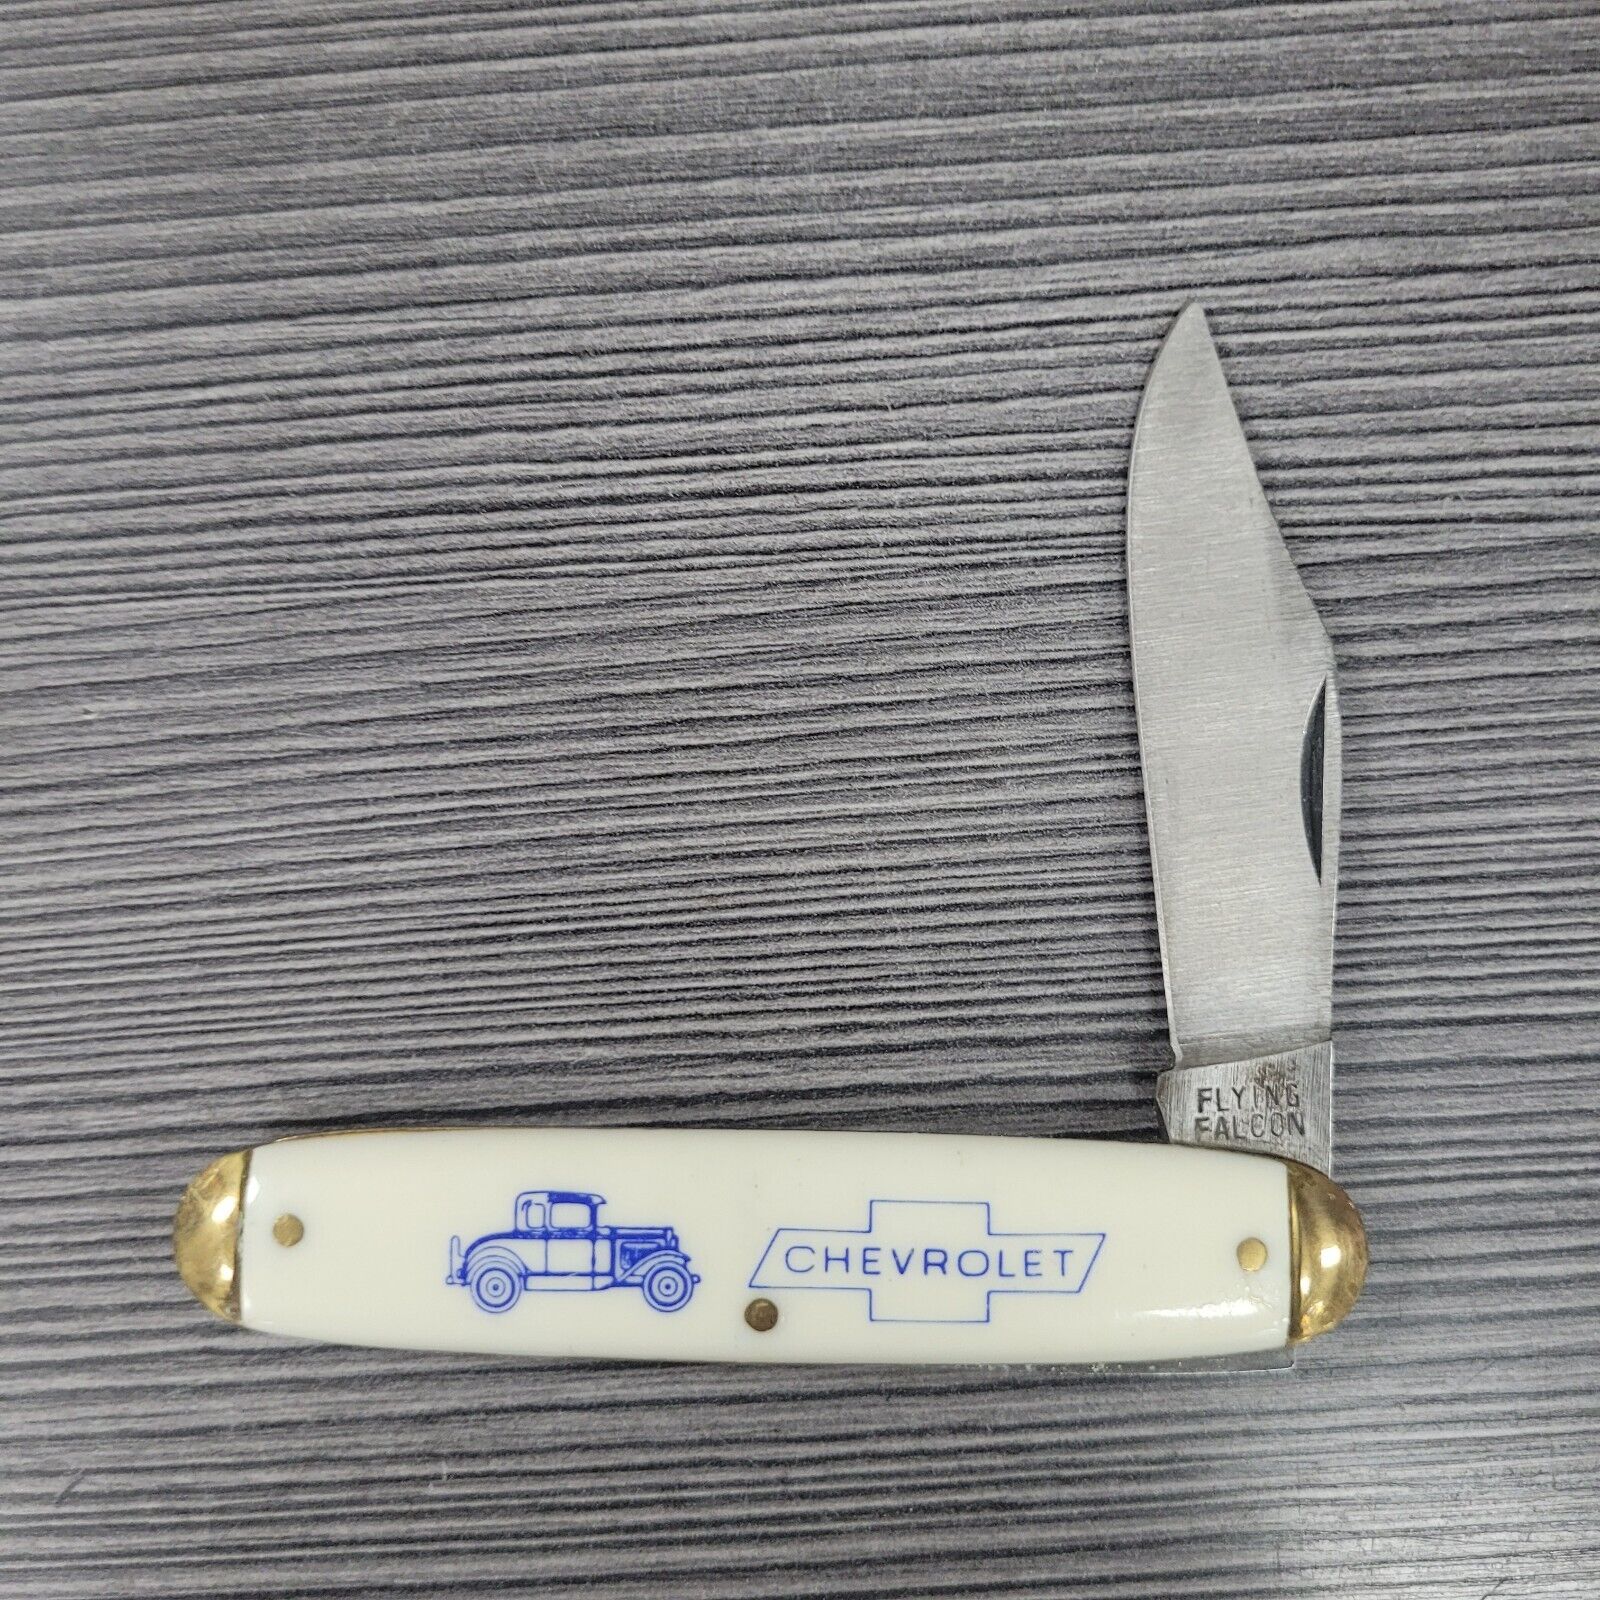 vintage flying falcon chevrolet chevy gm advertising knife nos